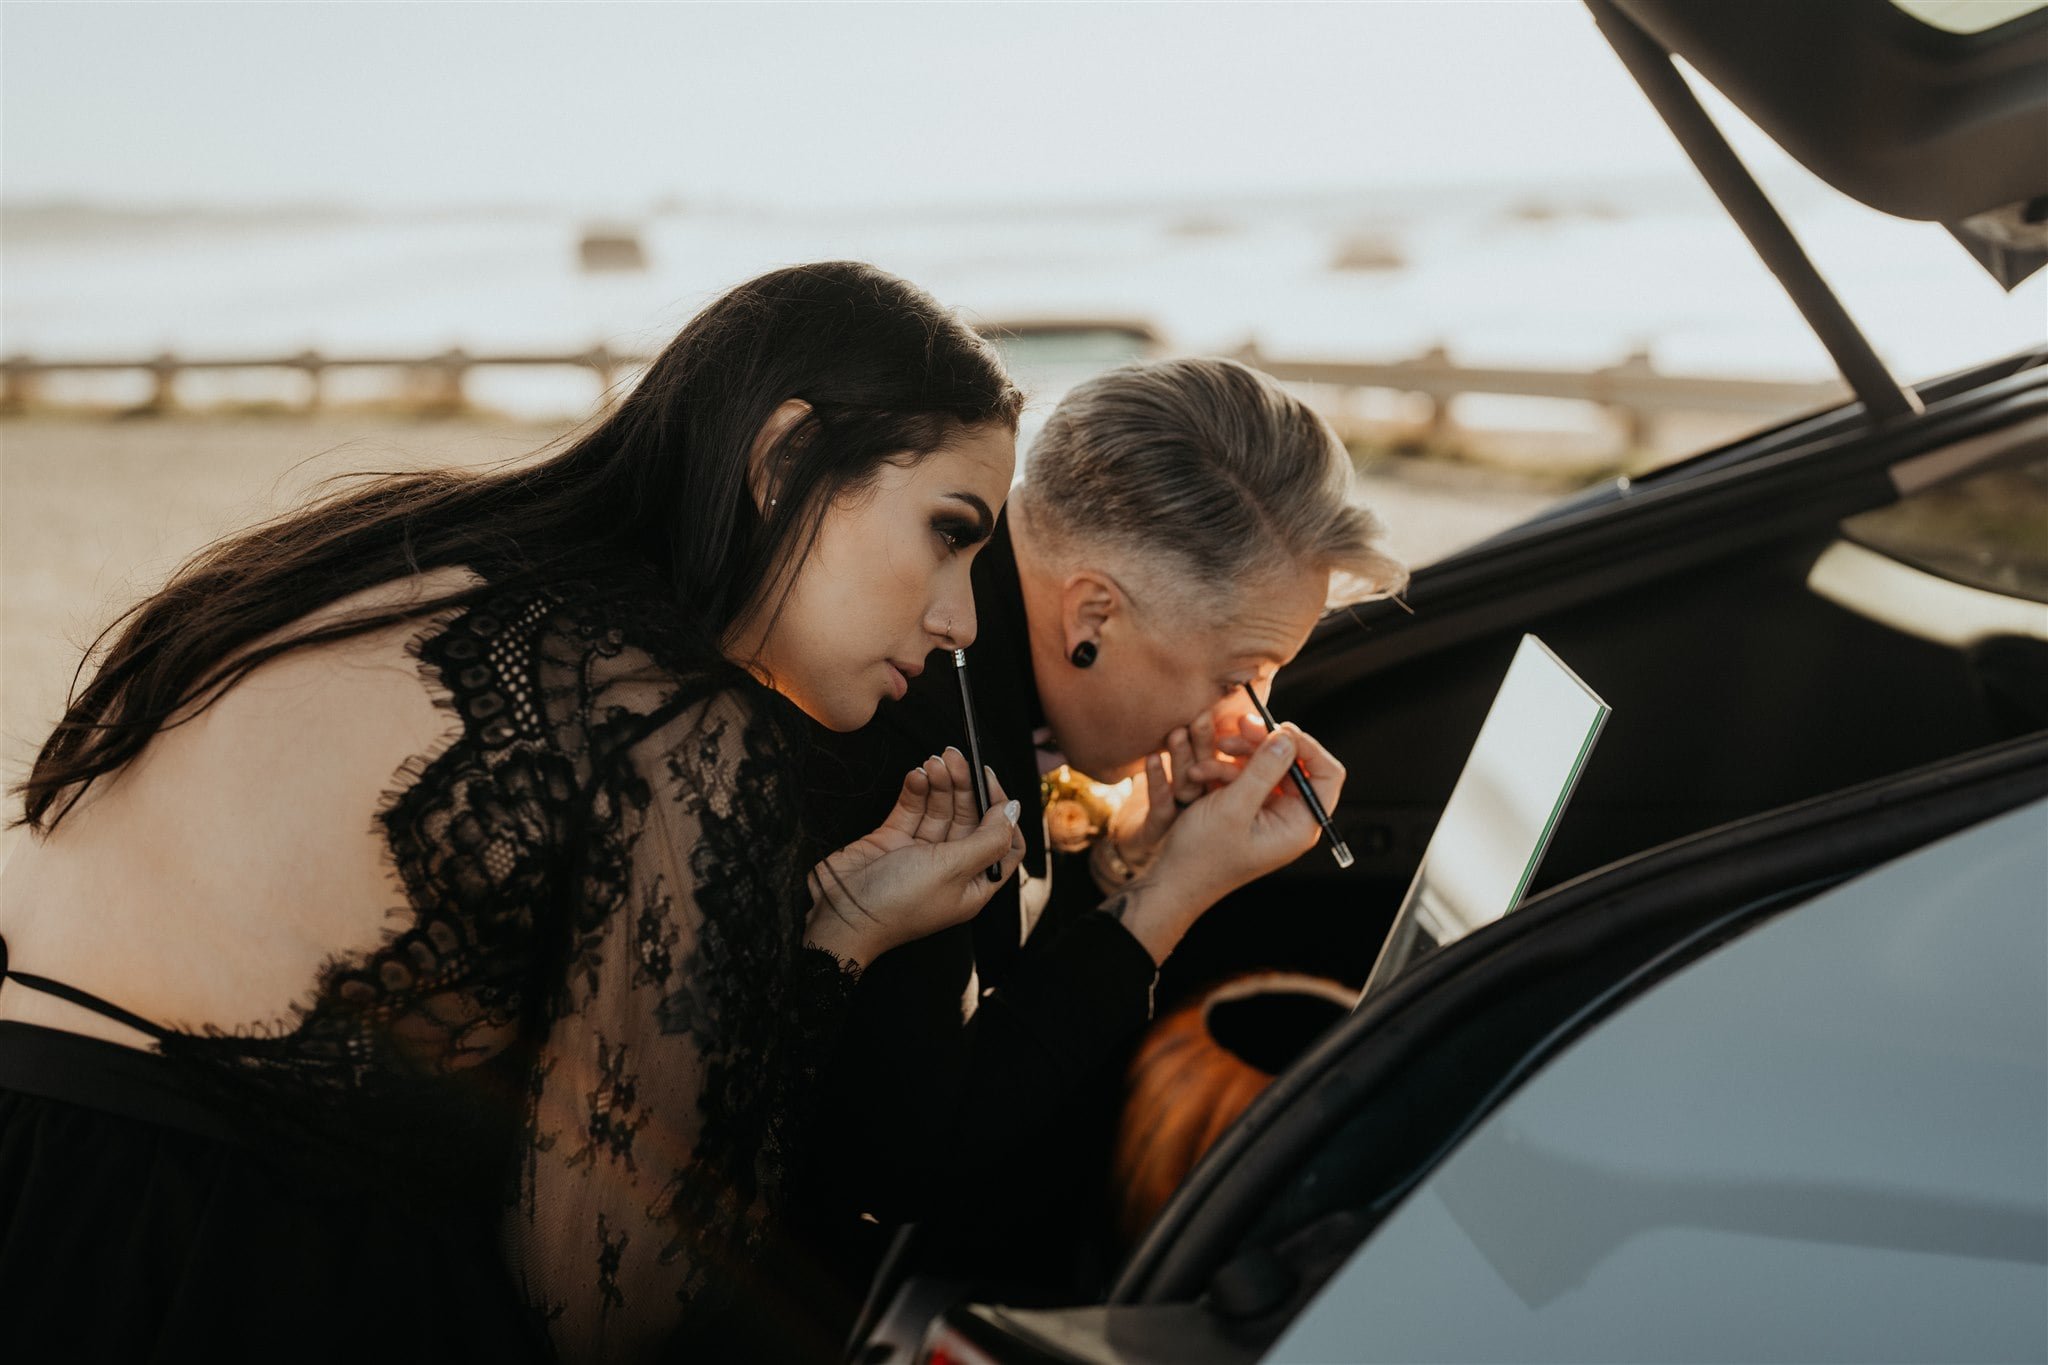 Brides touch up makeup in the car after Pacific Northwest elopement ceremony on the beach